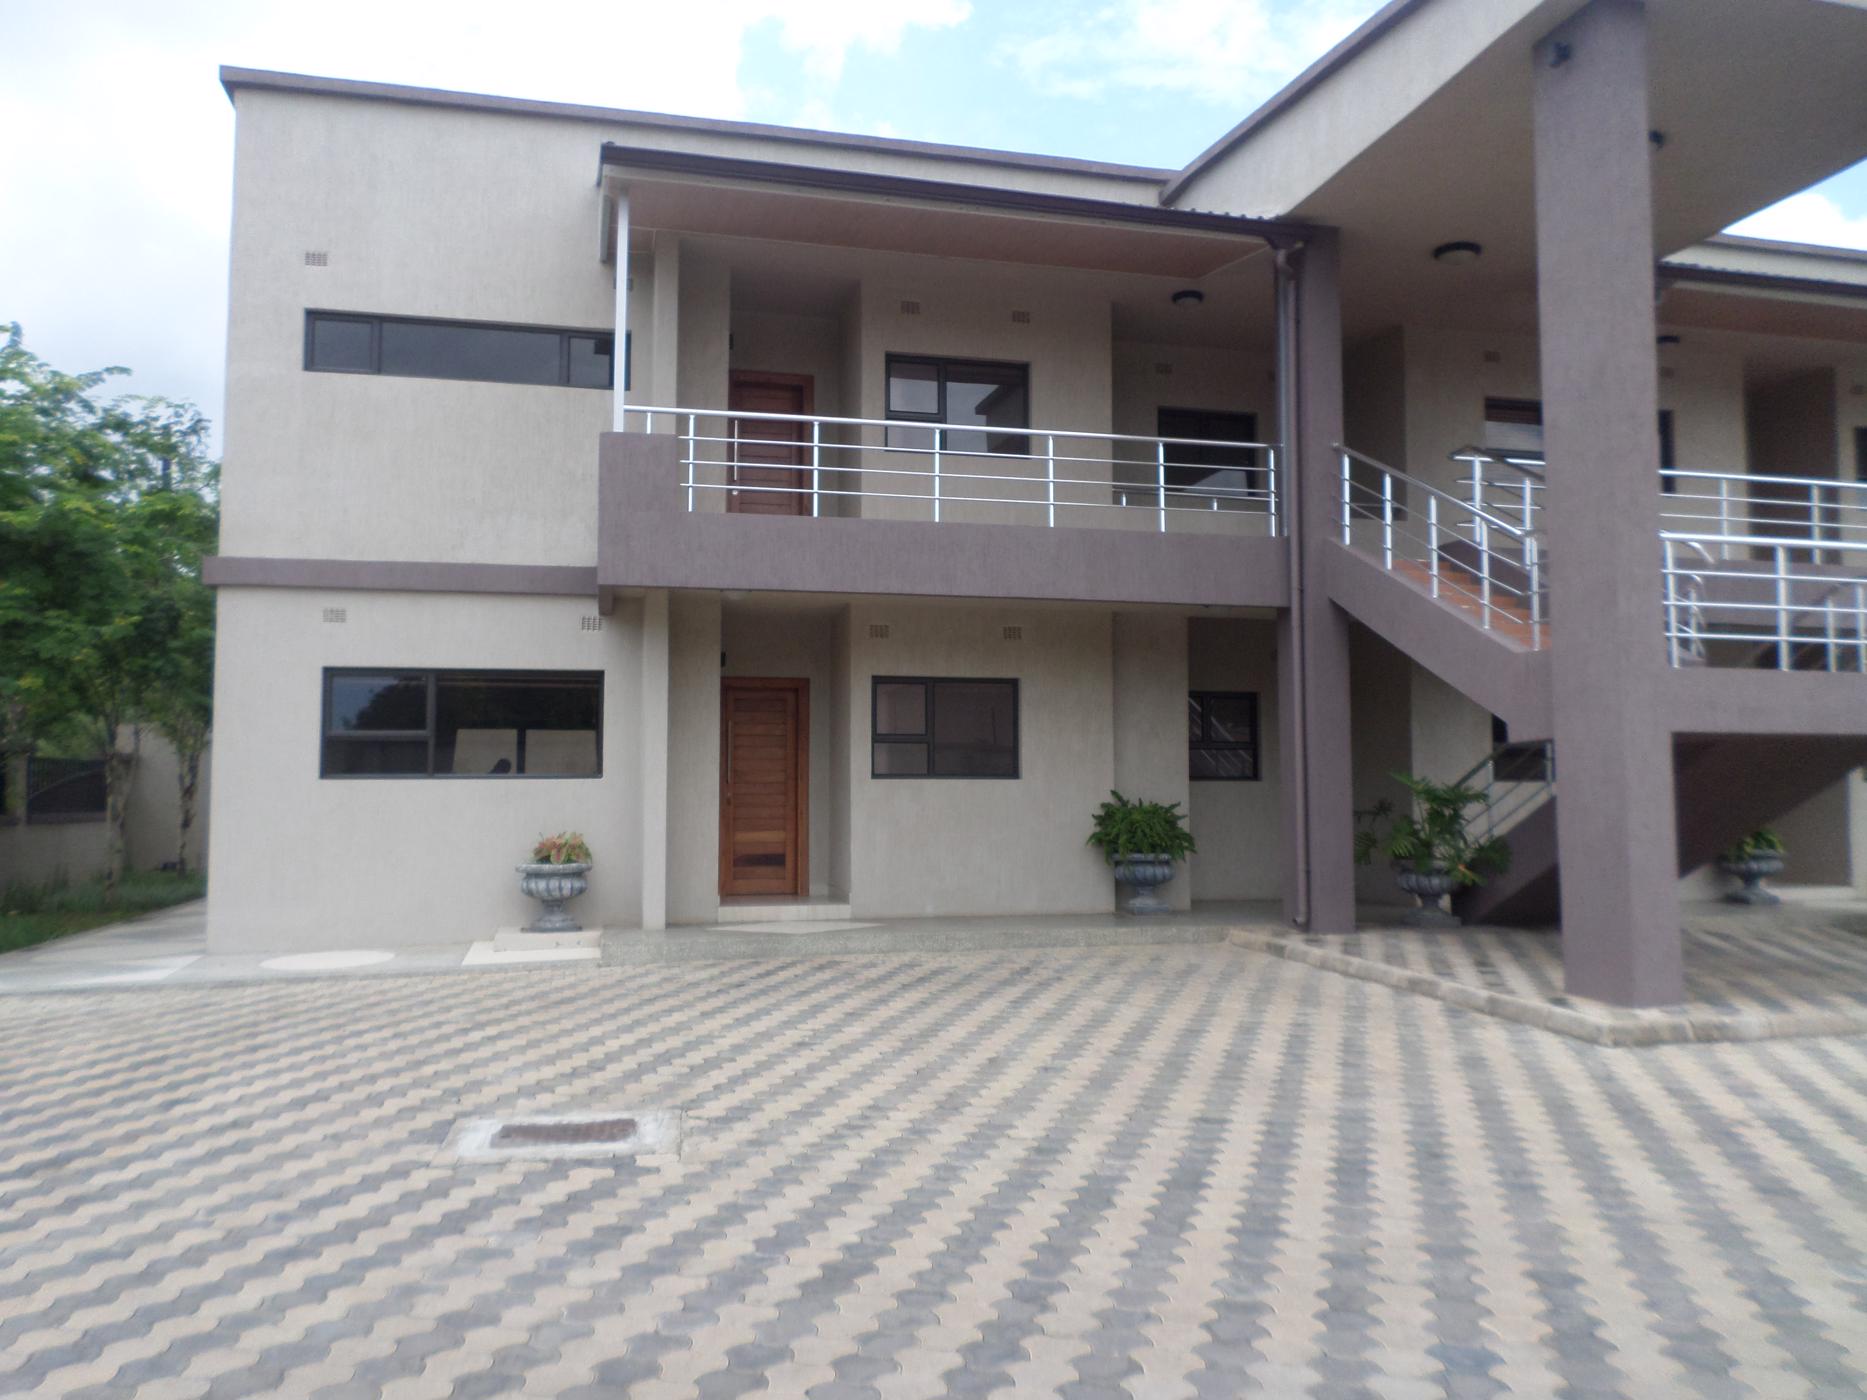 2 bedroom apartment to rent in Rhodespark (Zambia)